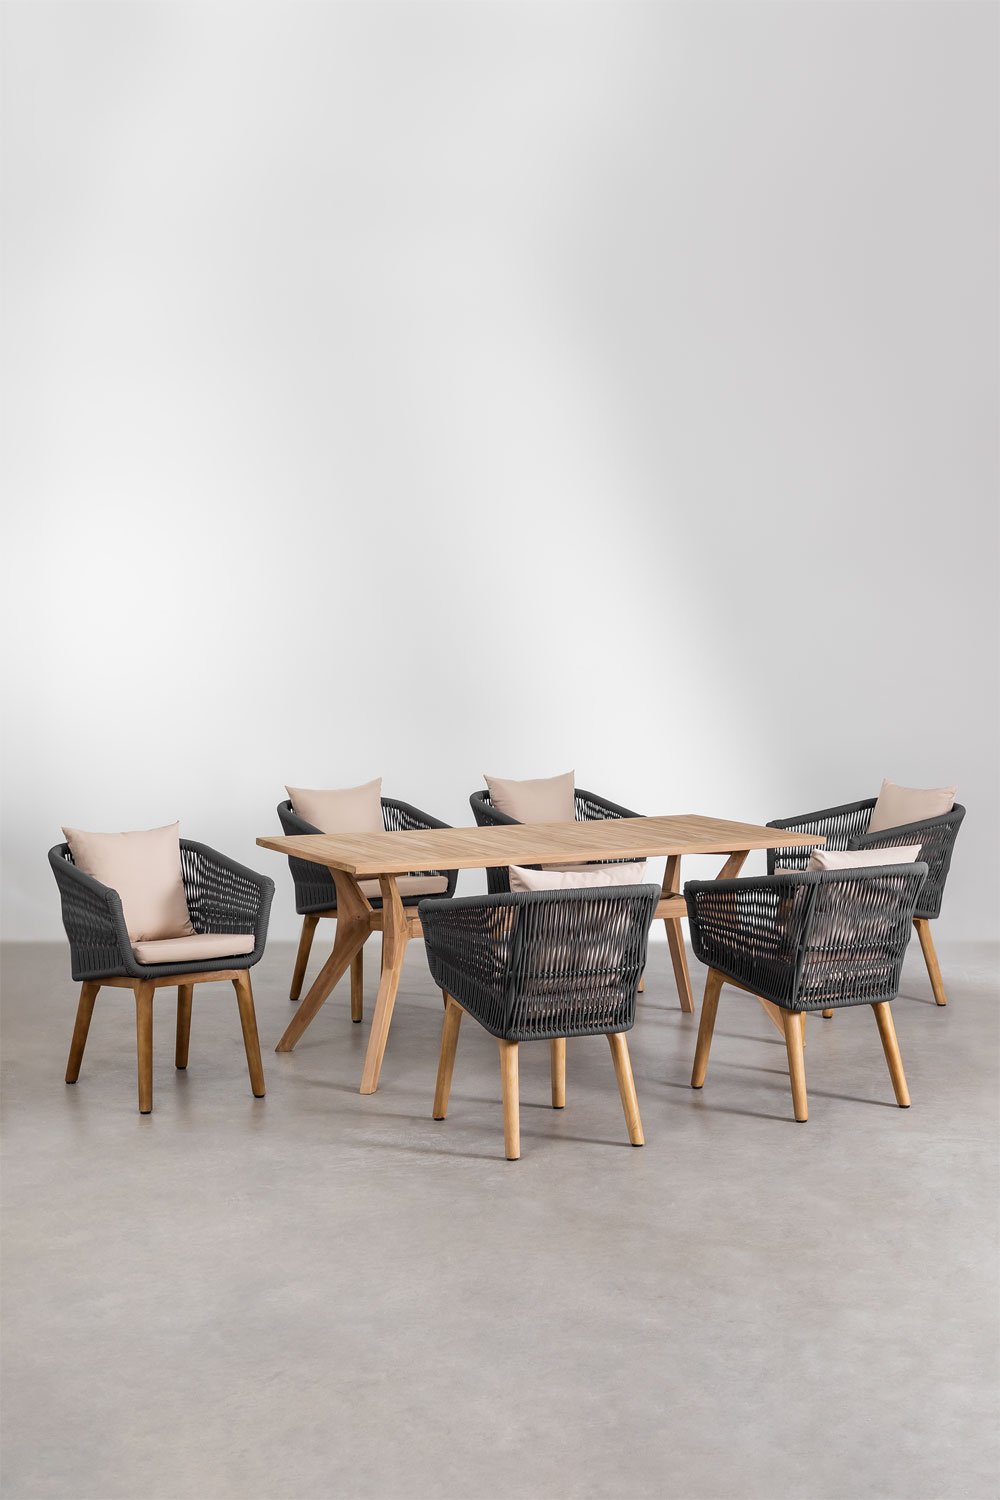 Yolen rectangular teak wood table set (180x90 cm) and 6 Barker dining chairs, gallery image 1